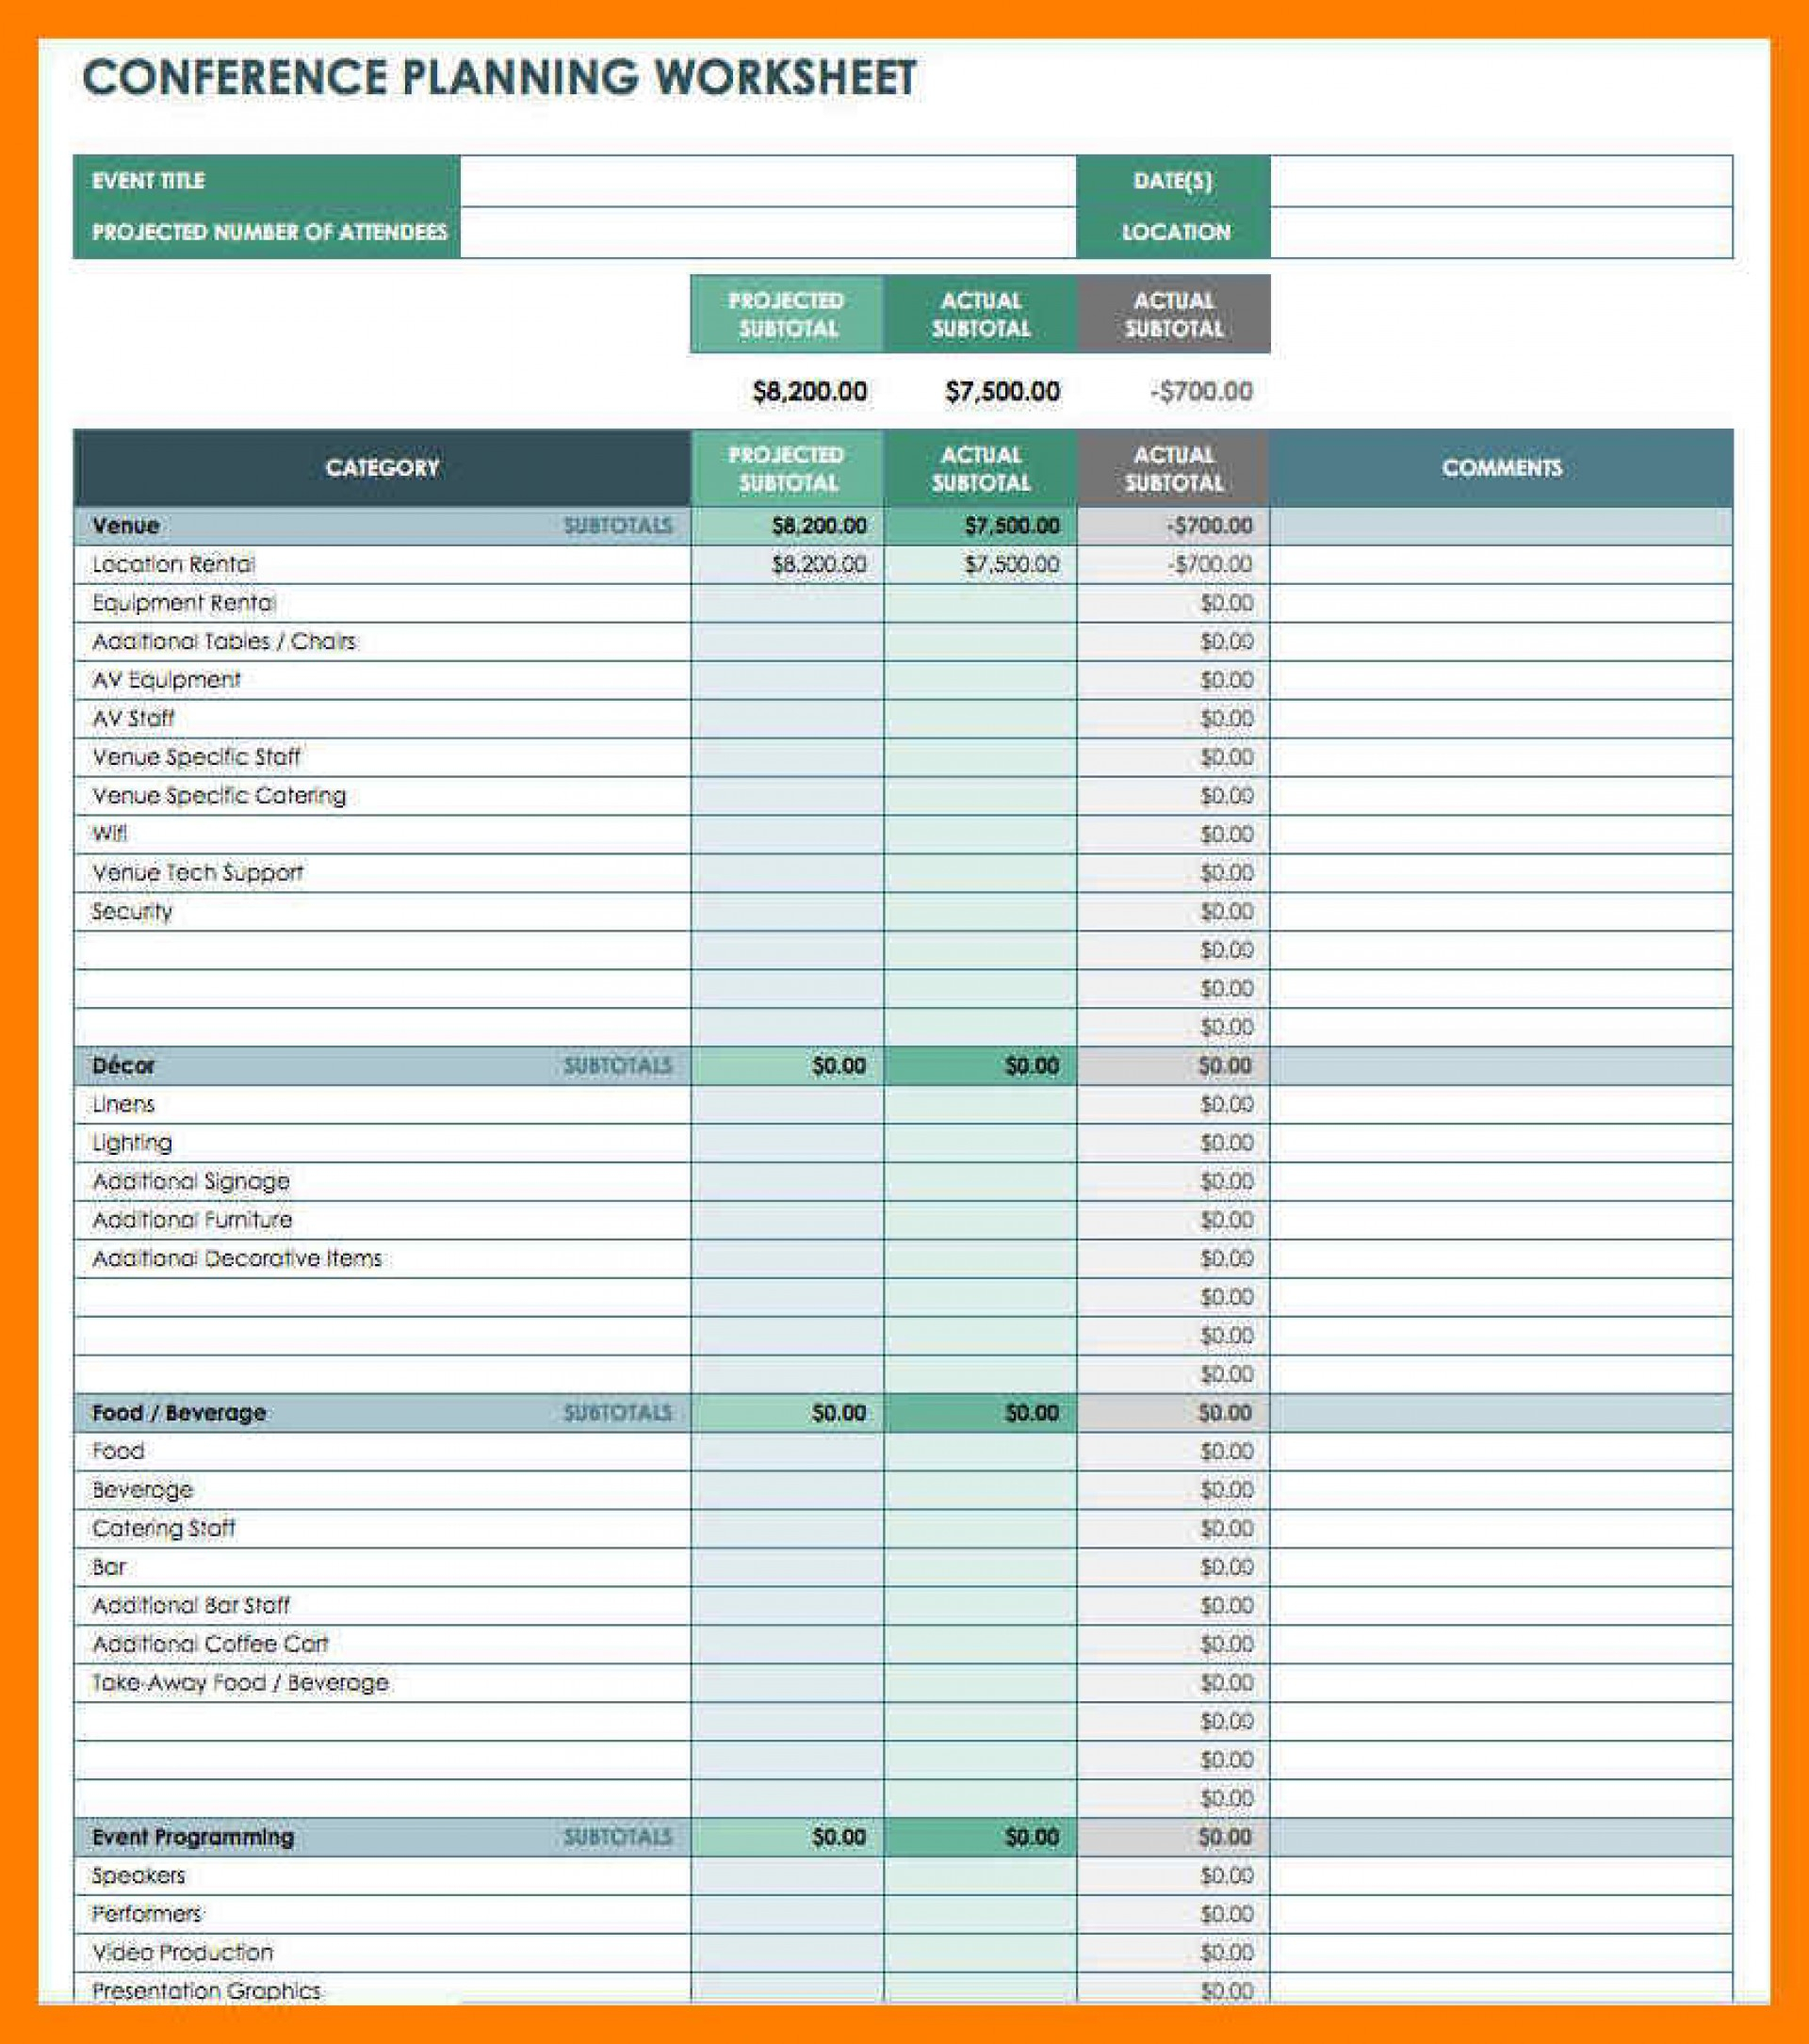 005 Event Plan Template Excel Ic Conference Planning regarding Event Planning Template Excel